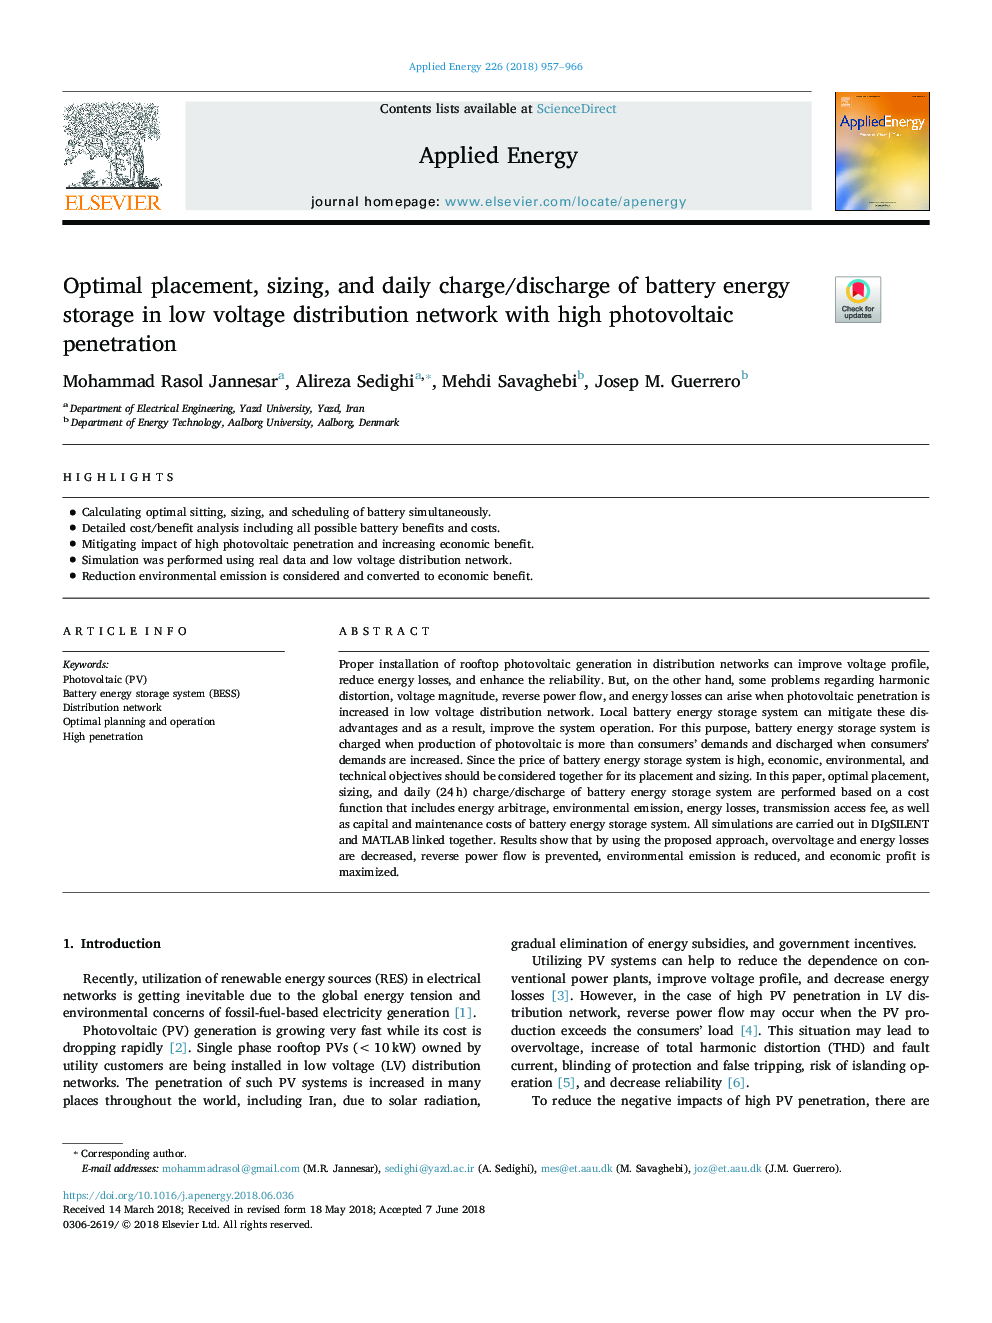 Optimal placement, sizing, and daily charge/discharge of battery energy storage in low voltage distribution network with high photovoltaic penetration